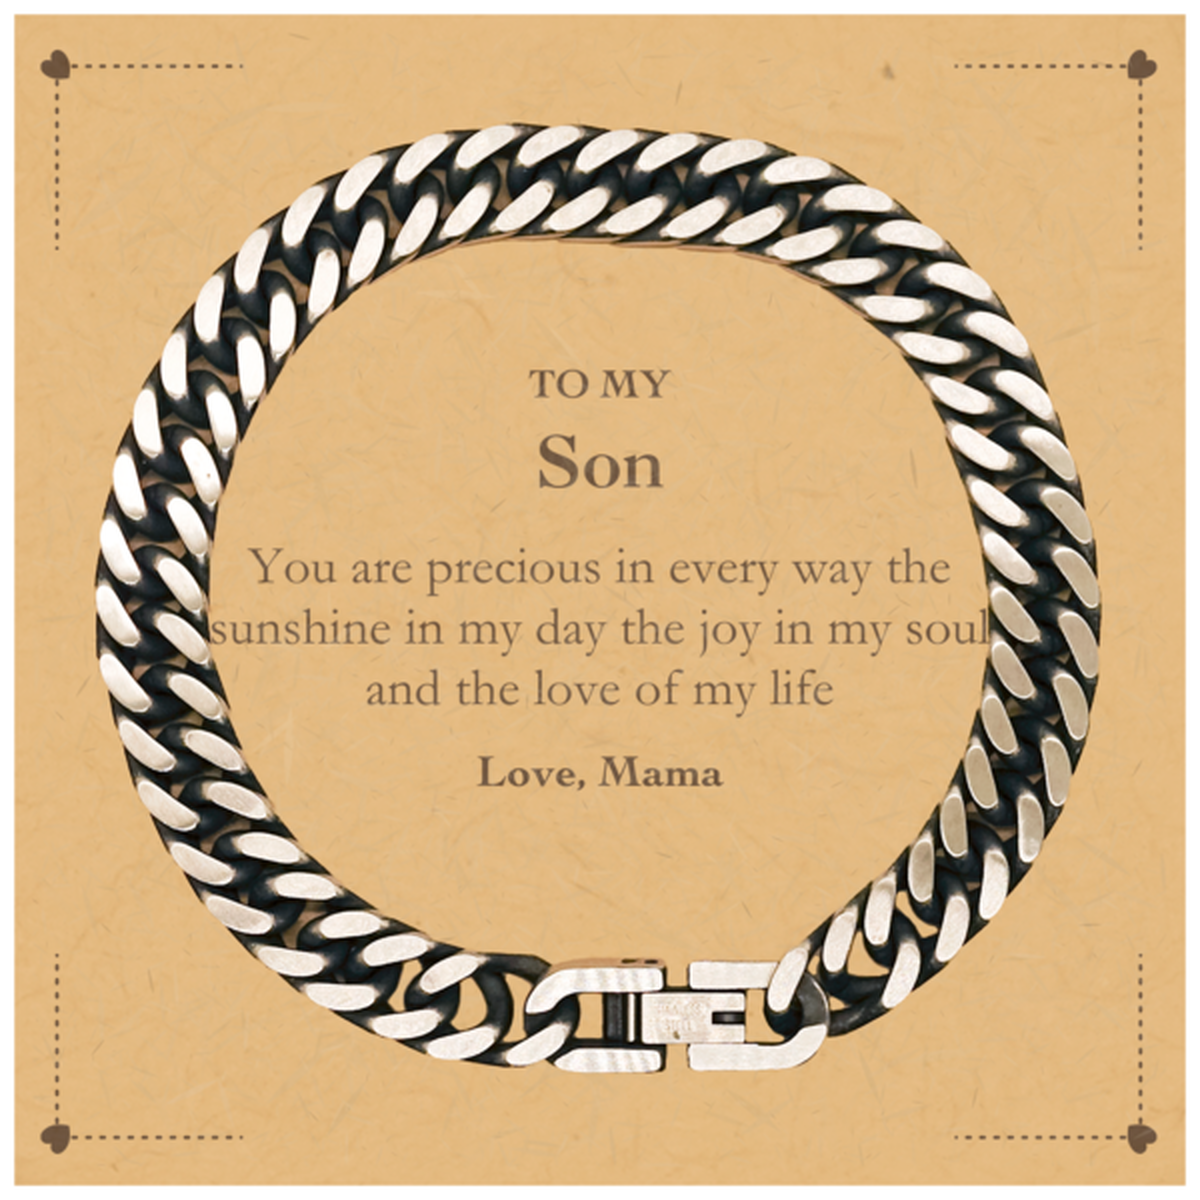 Graduation Gifts for Son Cuban Link Chain Bracelet Present from Mama, Christmas Son Birthday Gifts Son You are precious in every way the sunshine in my day. Love, Mama